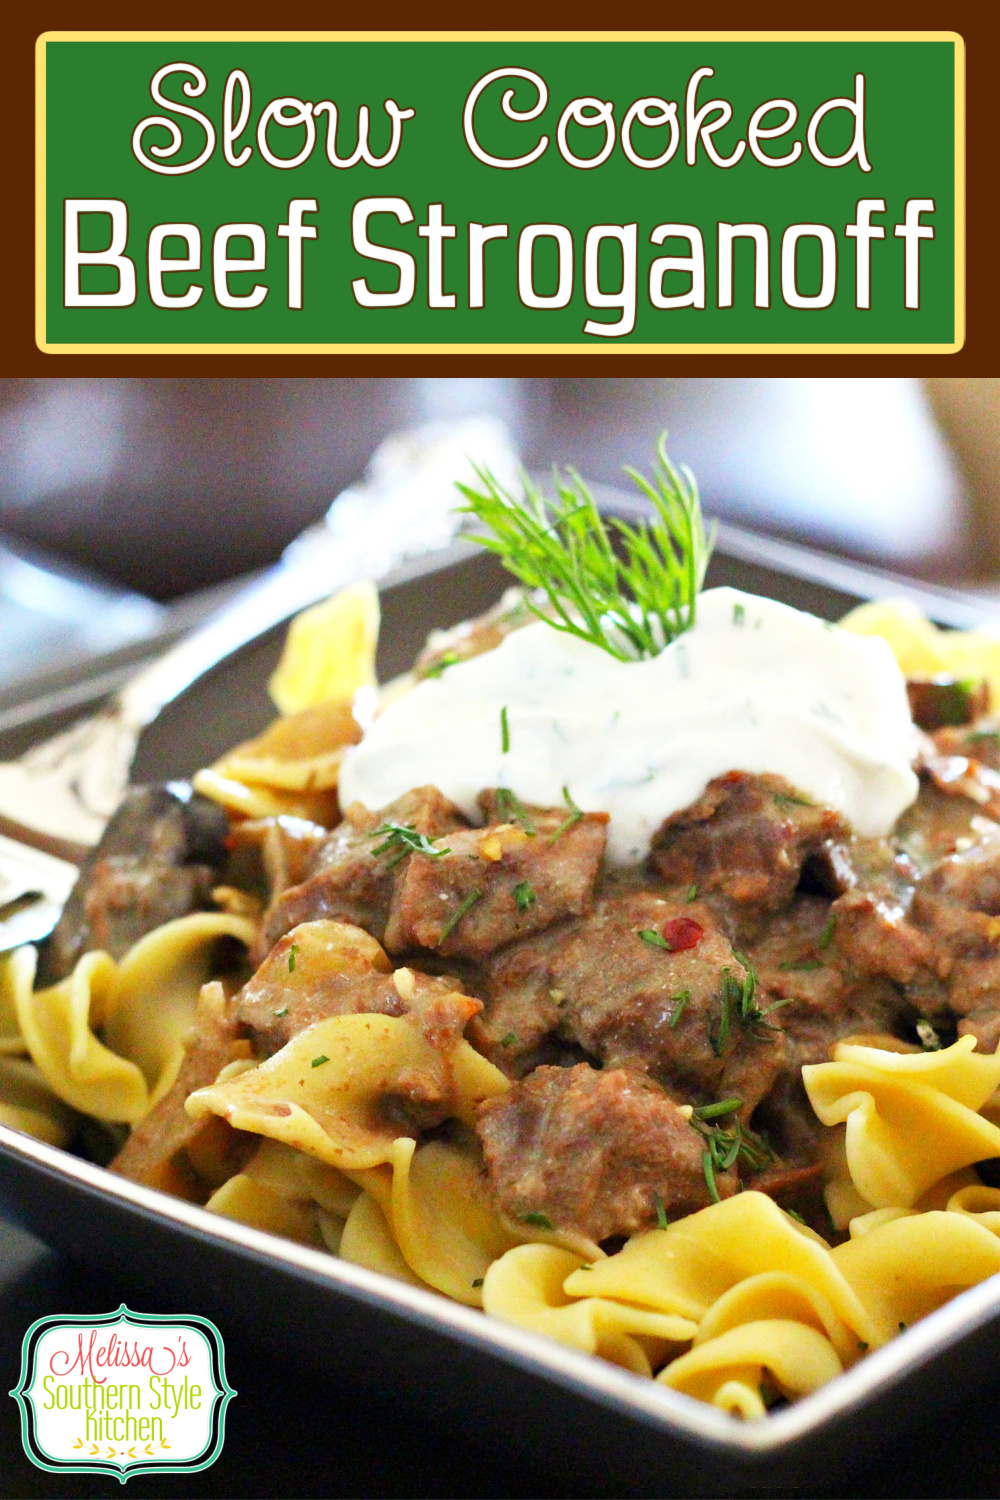 Slow Cooked Beef Stroganoff simmers top sirloin steak to tender perfection having it ready to serve over egg noodles for a weekday feast #slowcookedbeef #beefstroganoff #beefrecipes #slowcookerbeef #stroganoffrecipes #topsirloinsteak #crockpotrecipes #crockpotstroganoff